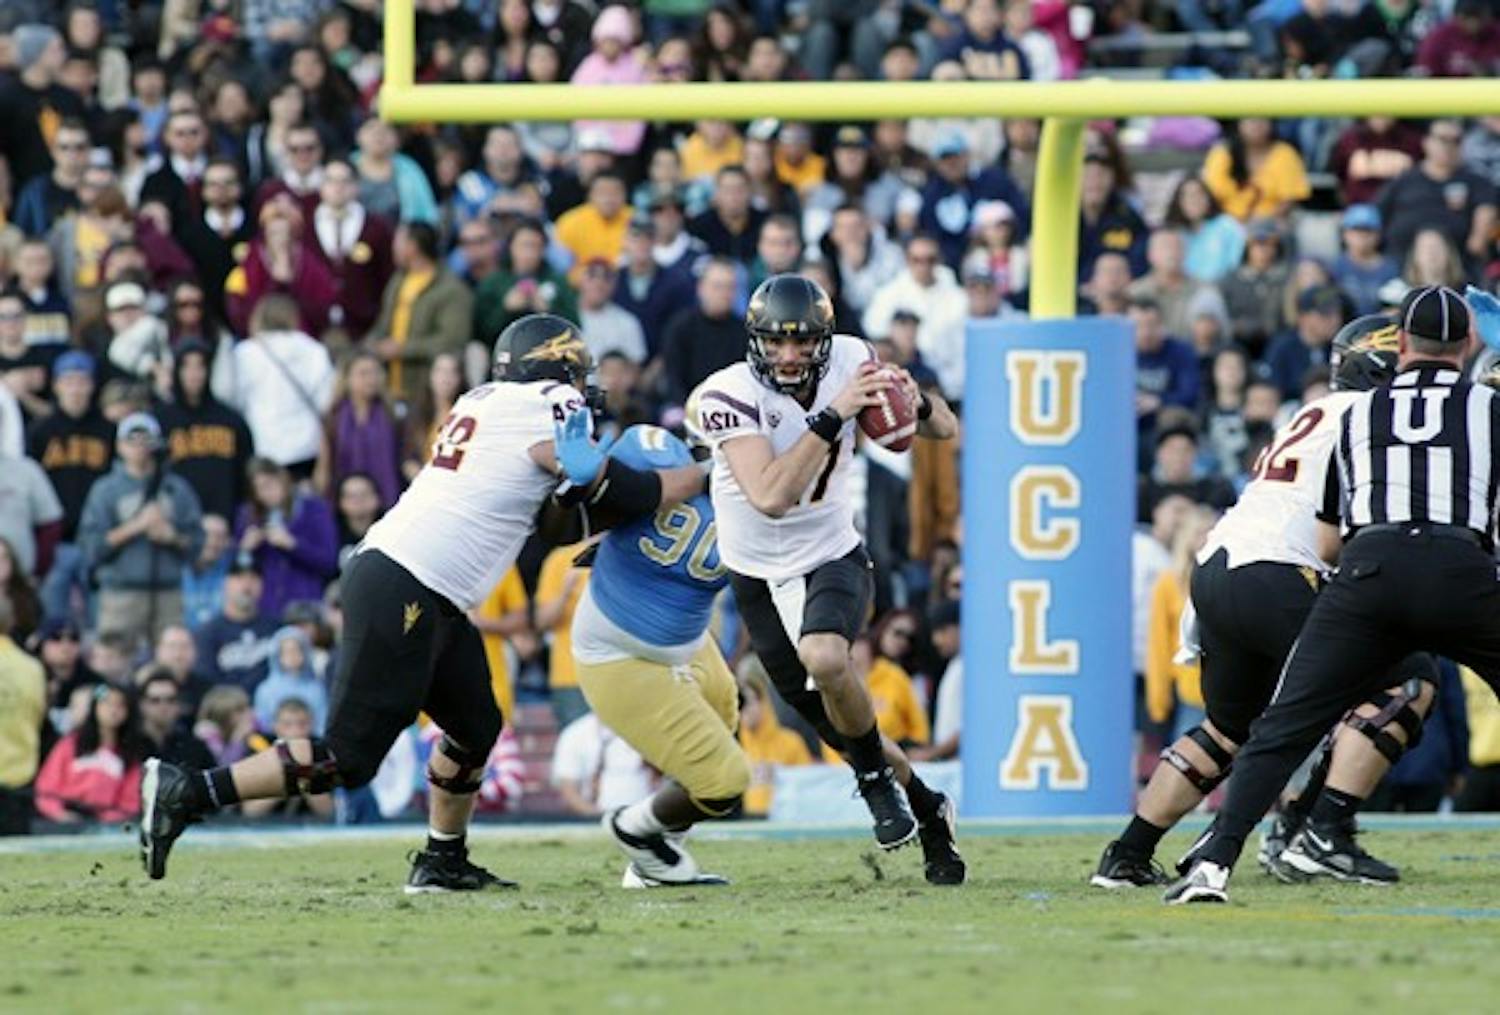 ASU junior quarterback Brock Osweiler runs up the middle during the Sun Devils’ loss to UCLA. The Sun Devils are headed to their first bowl game in four years. (Photo by Beth Easterbrook)